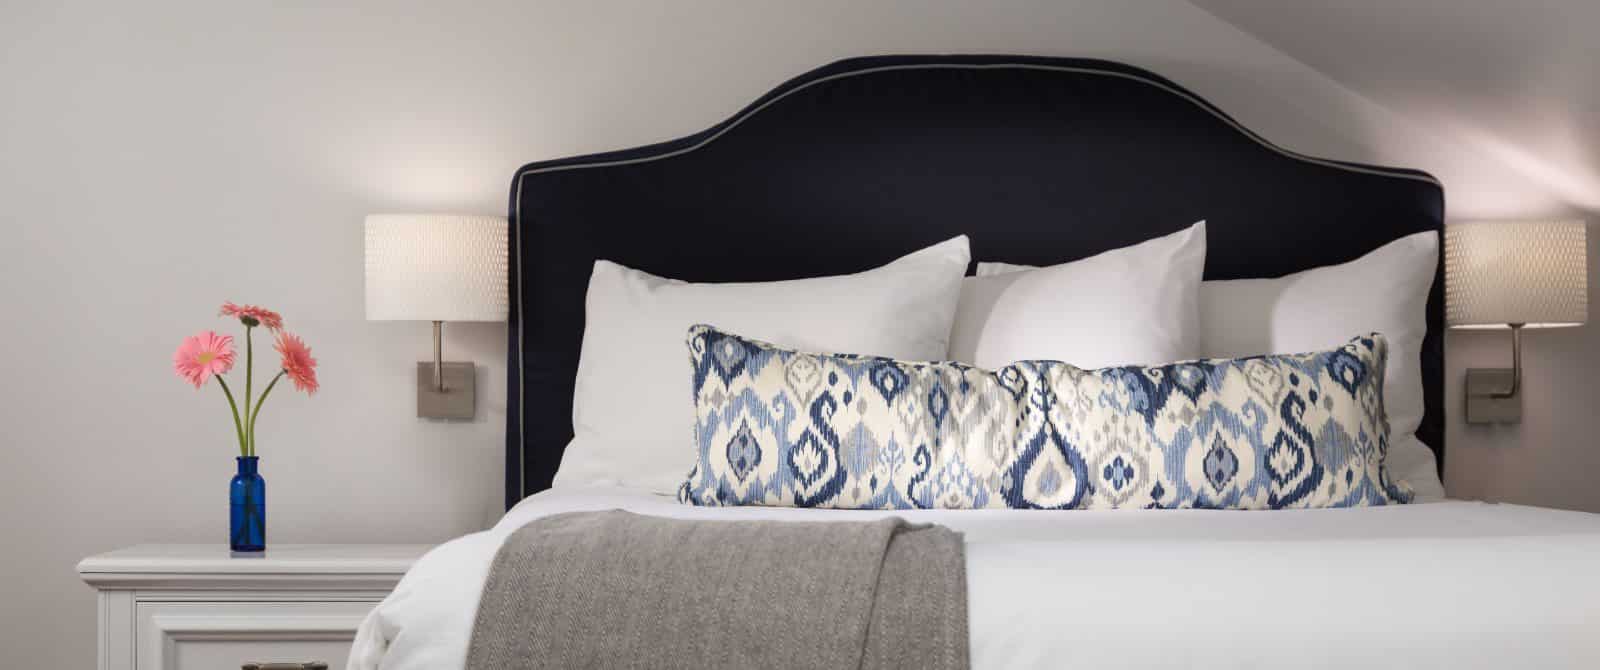 Bedroom with white walls, navy upholstered headboard, white bedding, white side table, and wall-mounted sconces